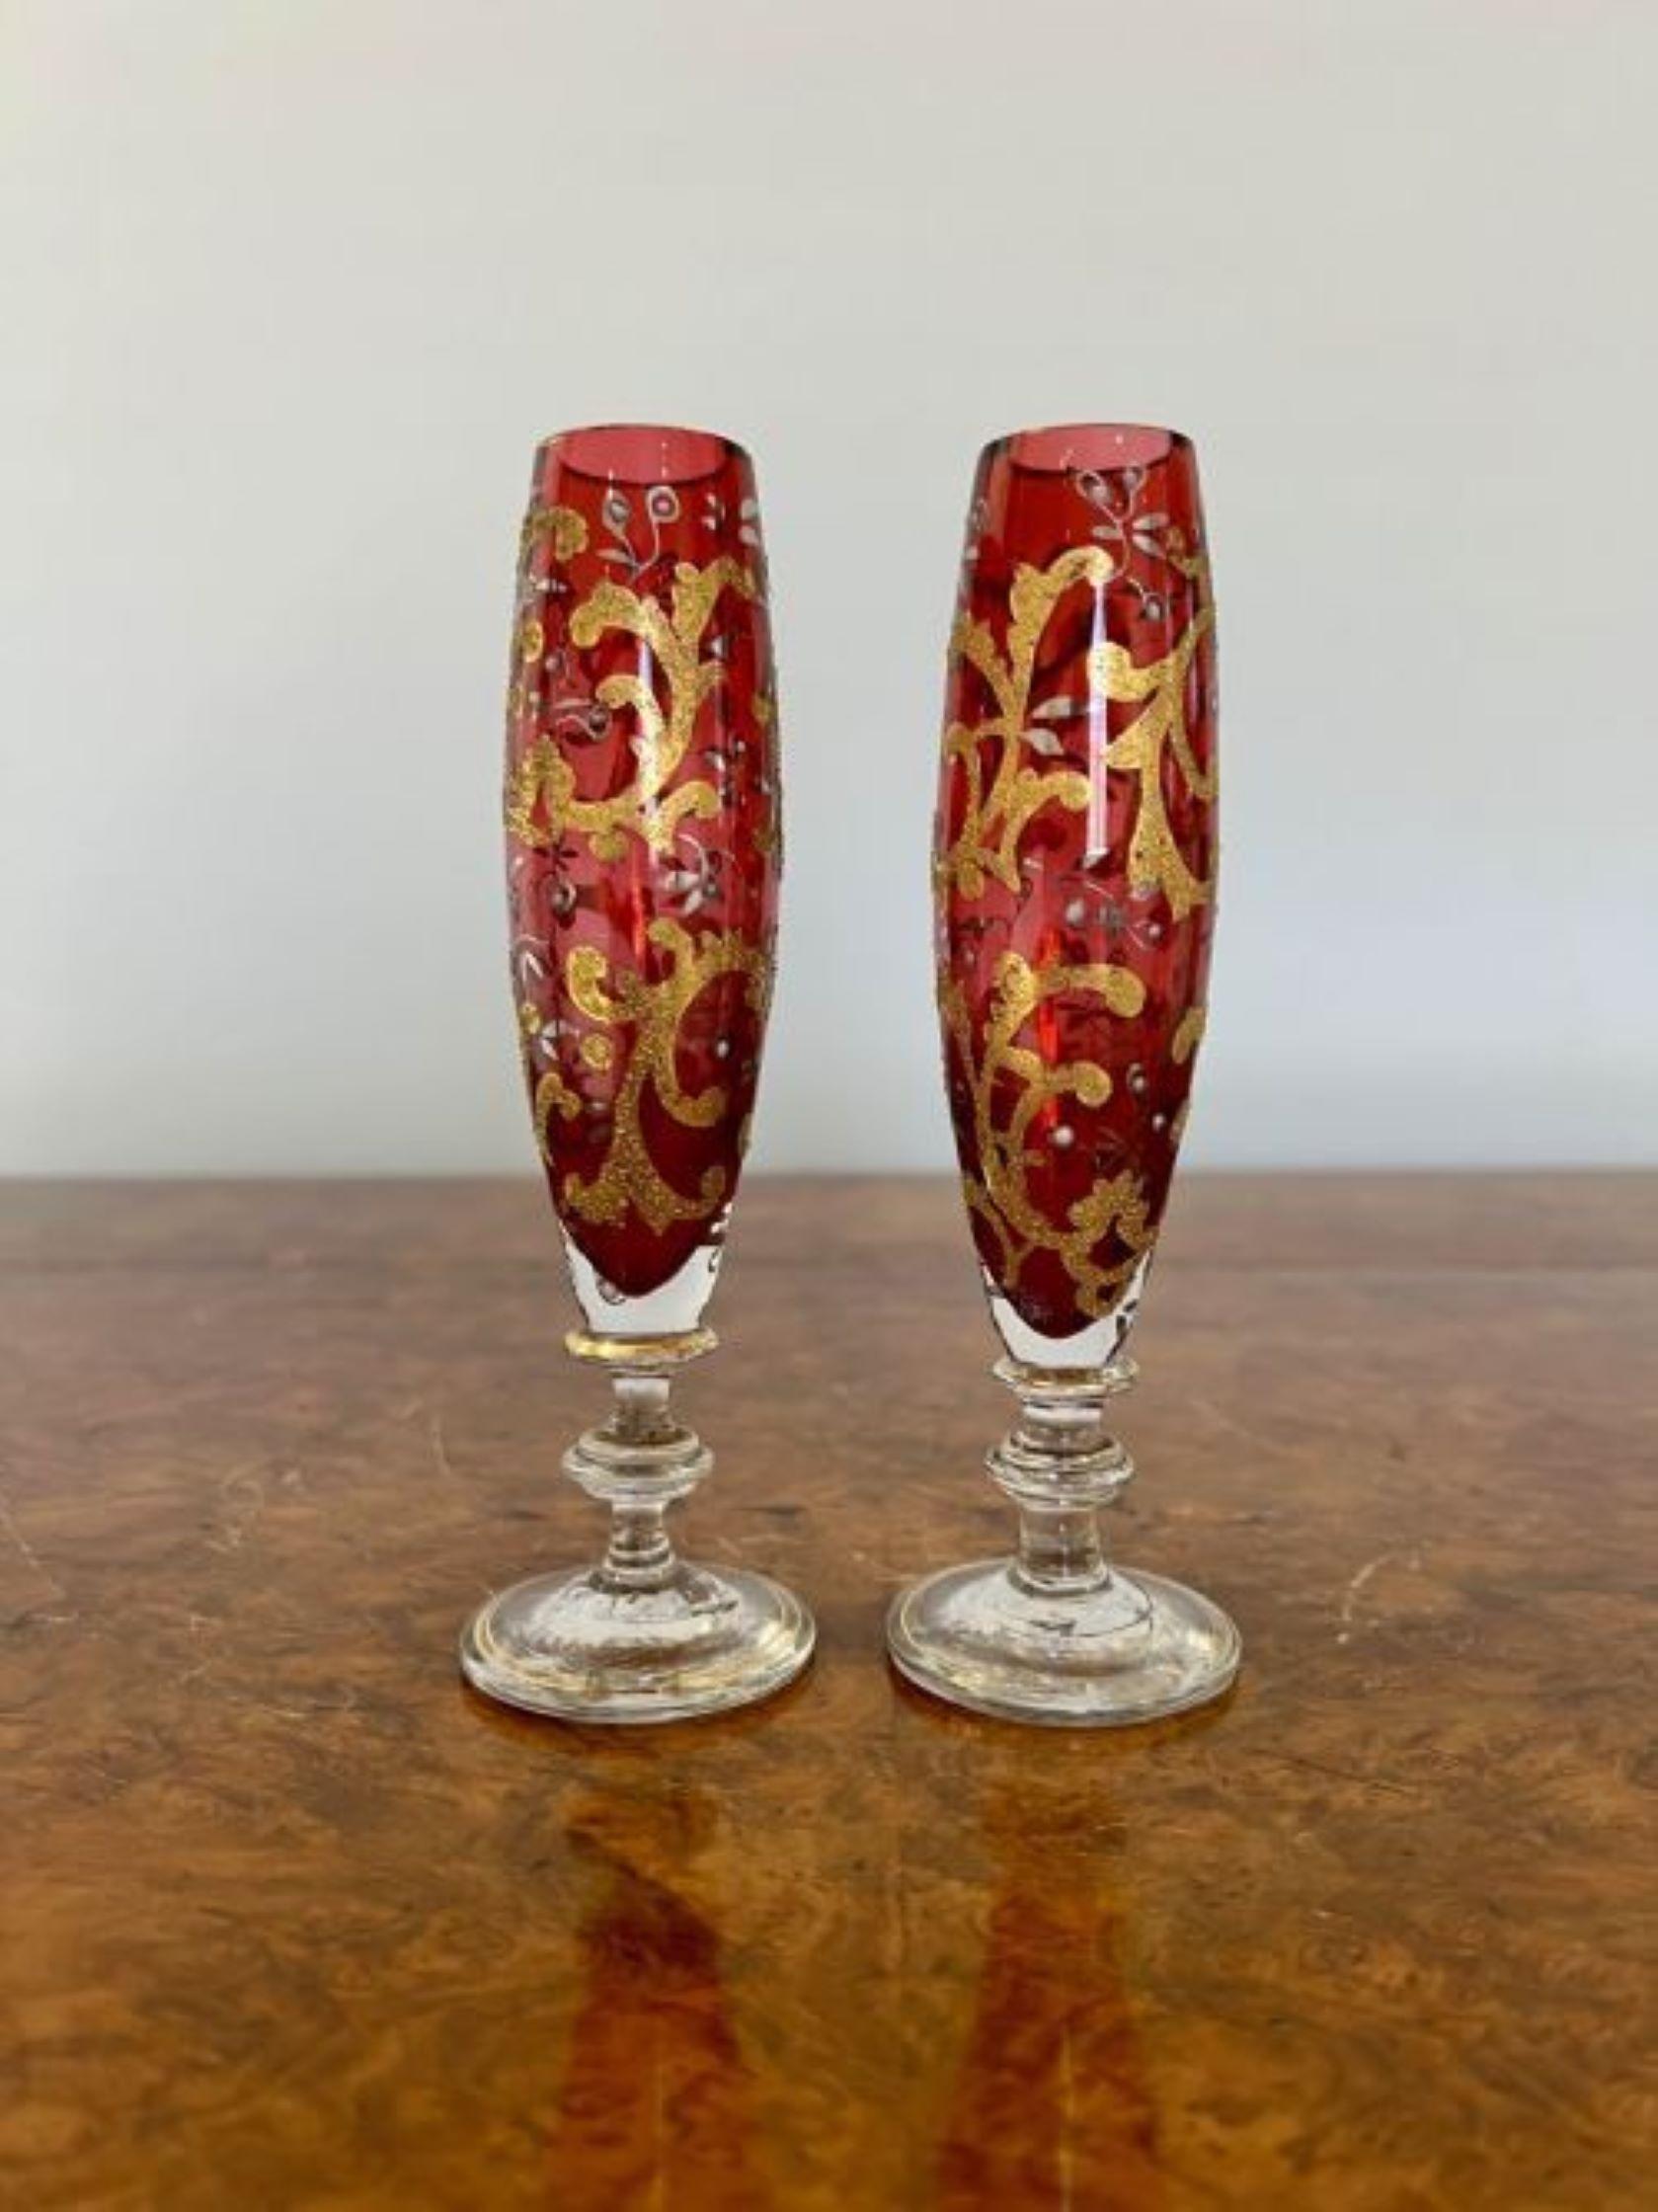 Pair of antique quality Bohemian glass vases having a quality shaped glass ruby glass vase with gold gilded decoration standing on circular bases 